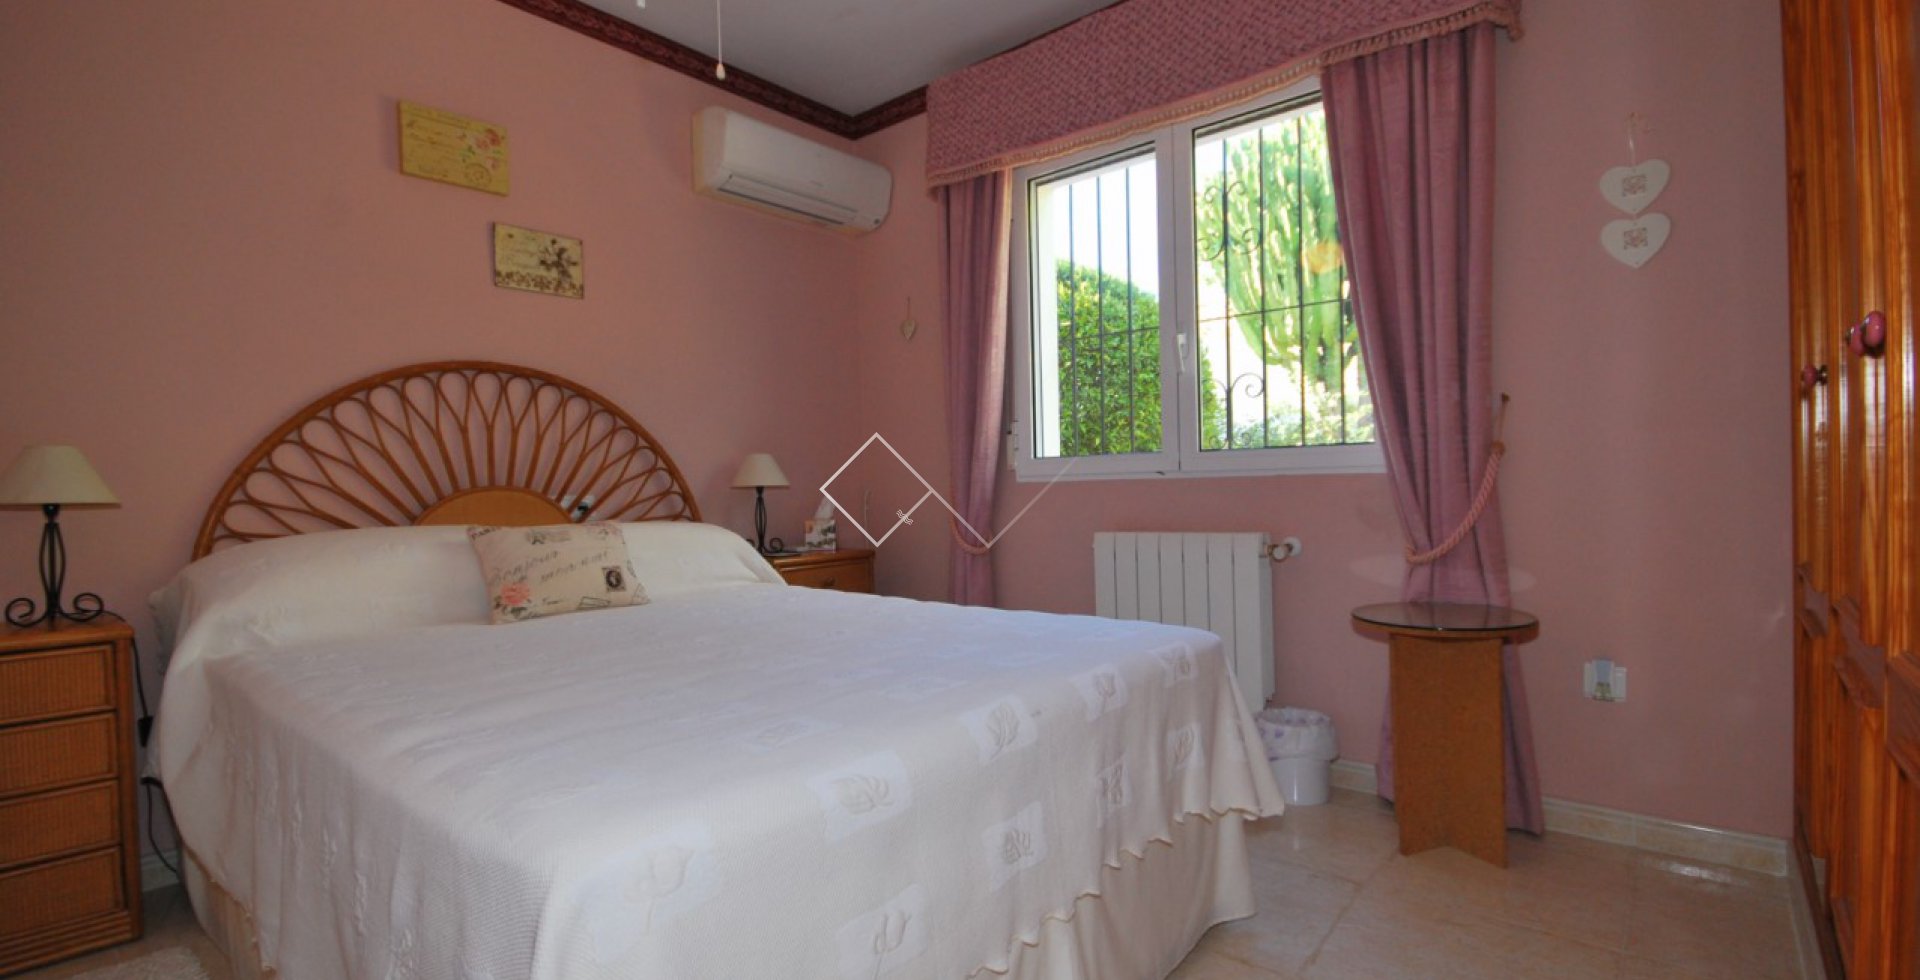 Detached villa on 1 level, located within the urbanisation of Les Fonts, on just a short distance to the town and at 10 minutes drive to the coast